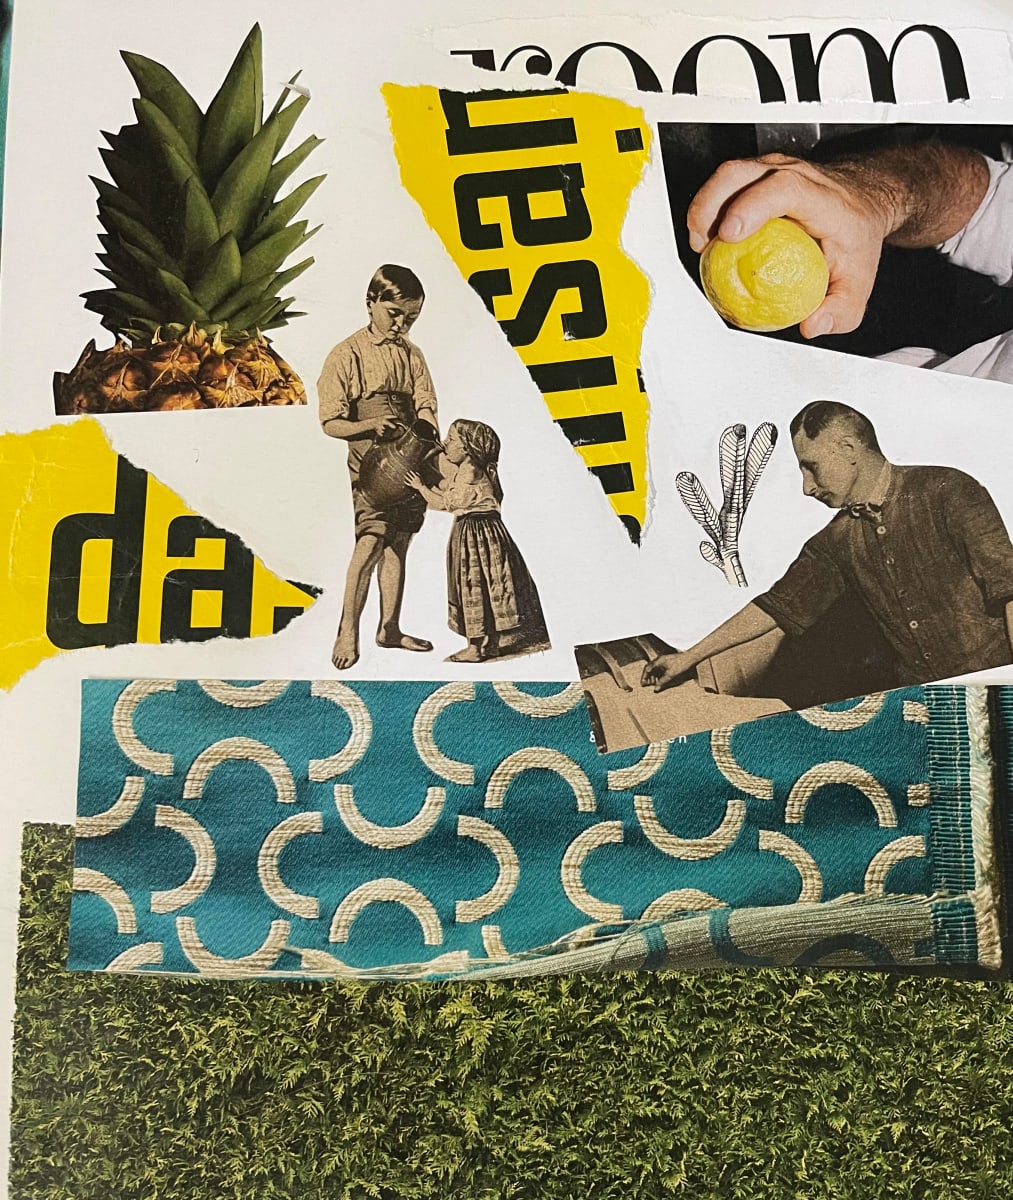 Cut Out Collage Page for Kolaj Magazine World Collage Day 2020 by Susanna Lakner  Image: Cut Out Collage Page for Kolaj Magazine World Collage Day 2020 by Susanna Lakner